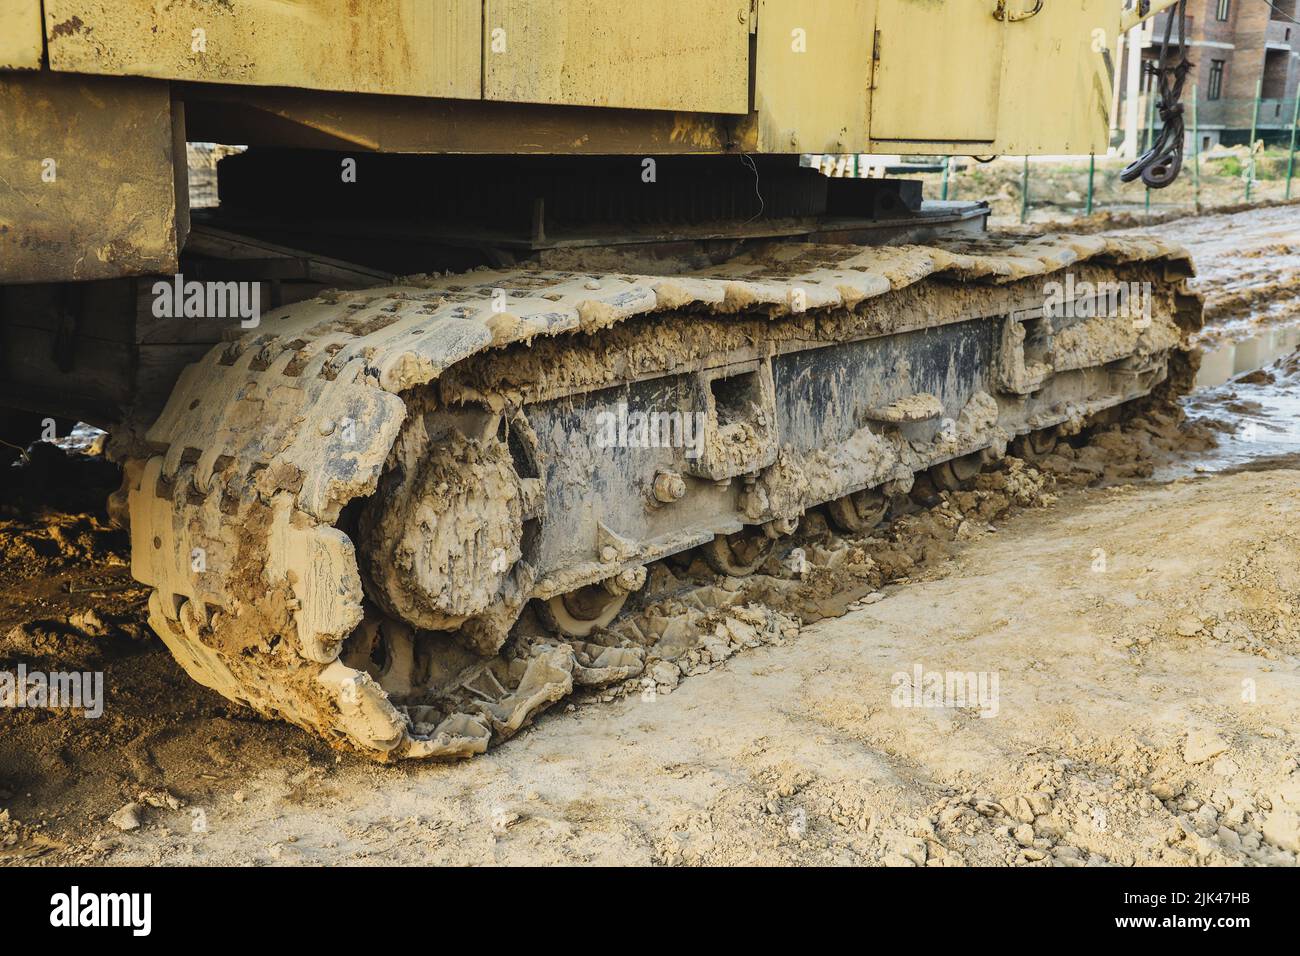 Detail of dirty caterpillar track in construction site Stock Photo